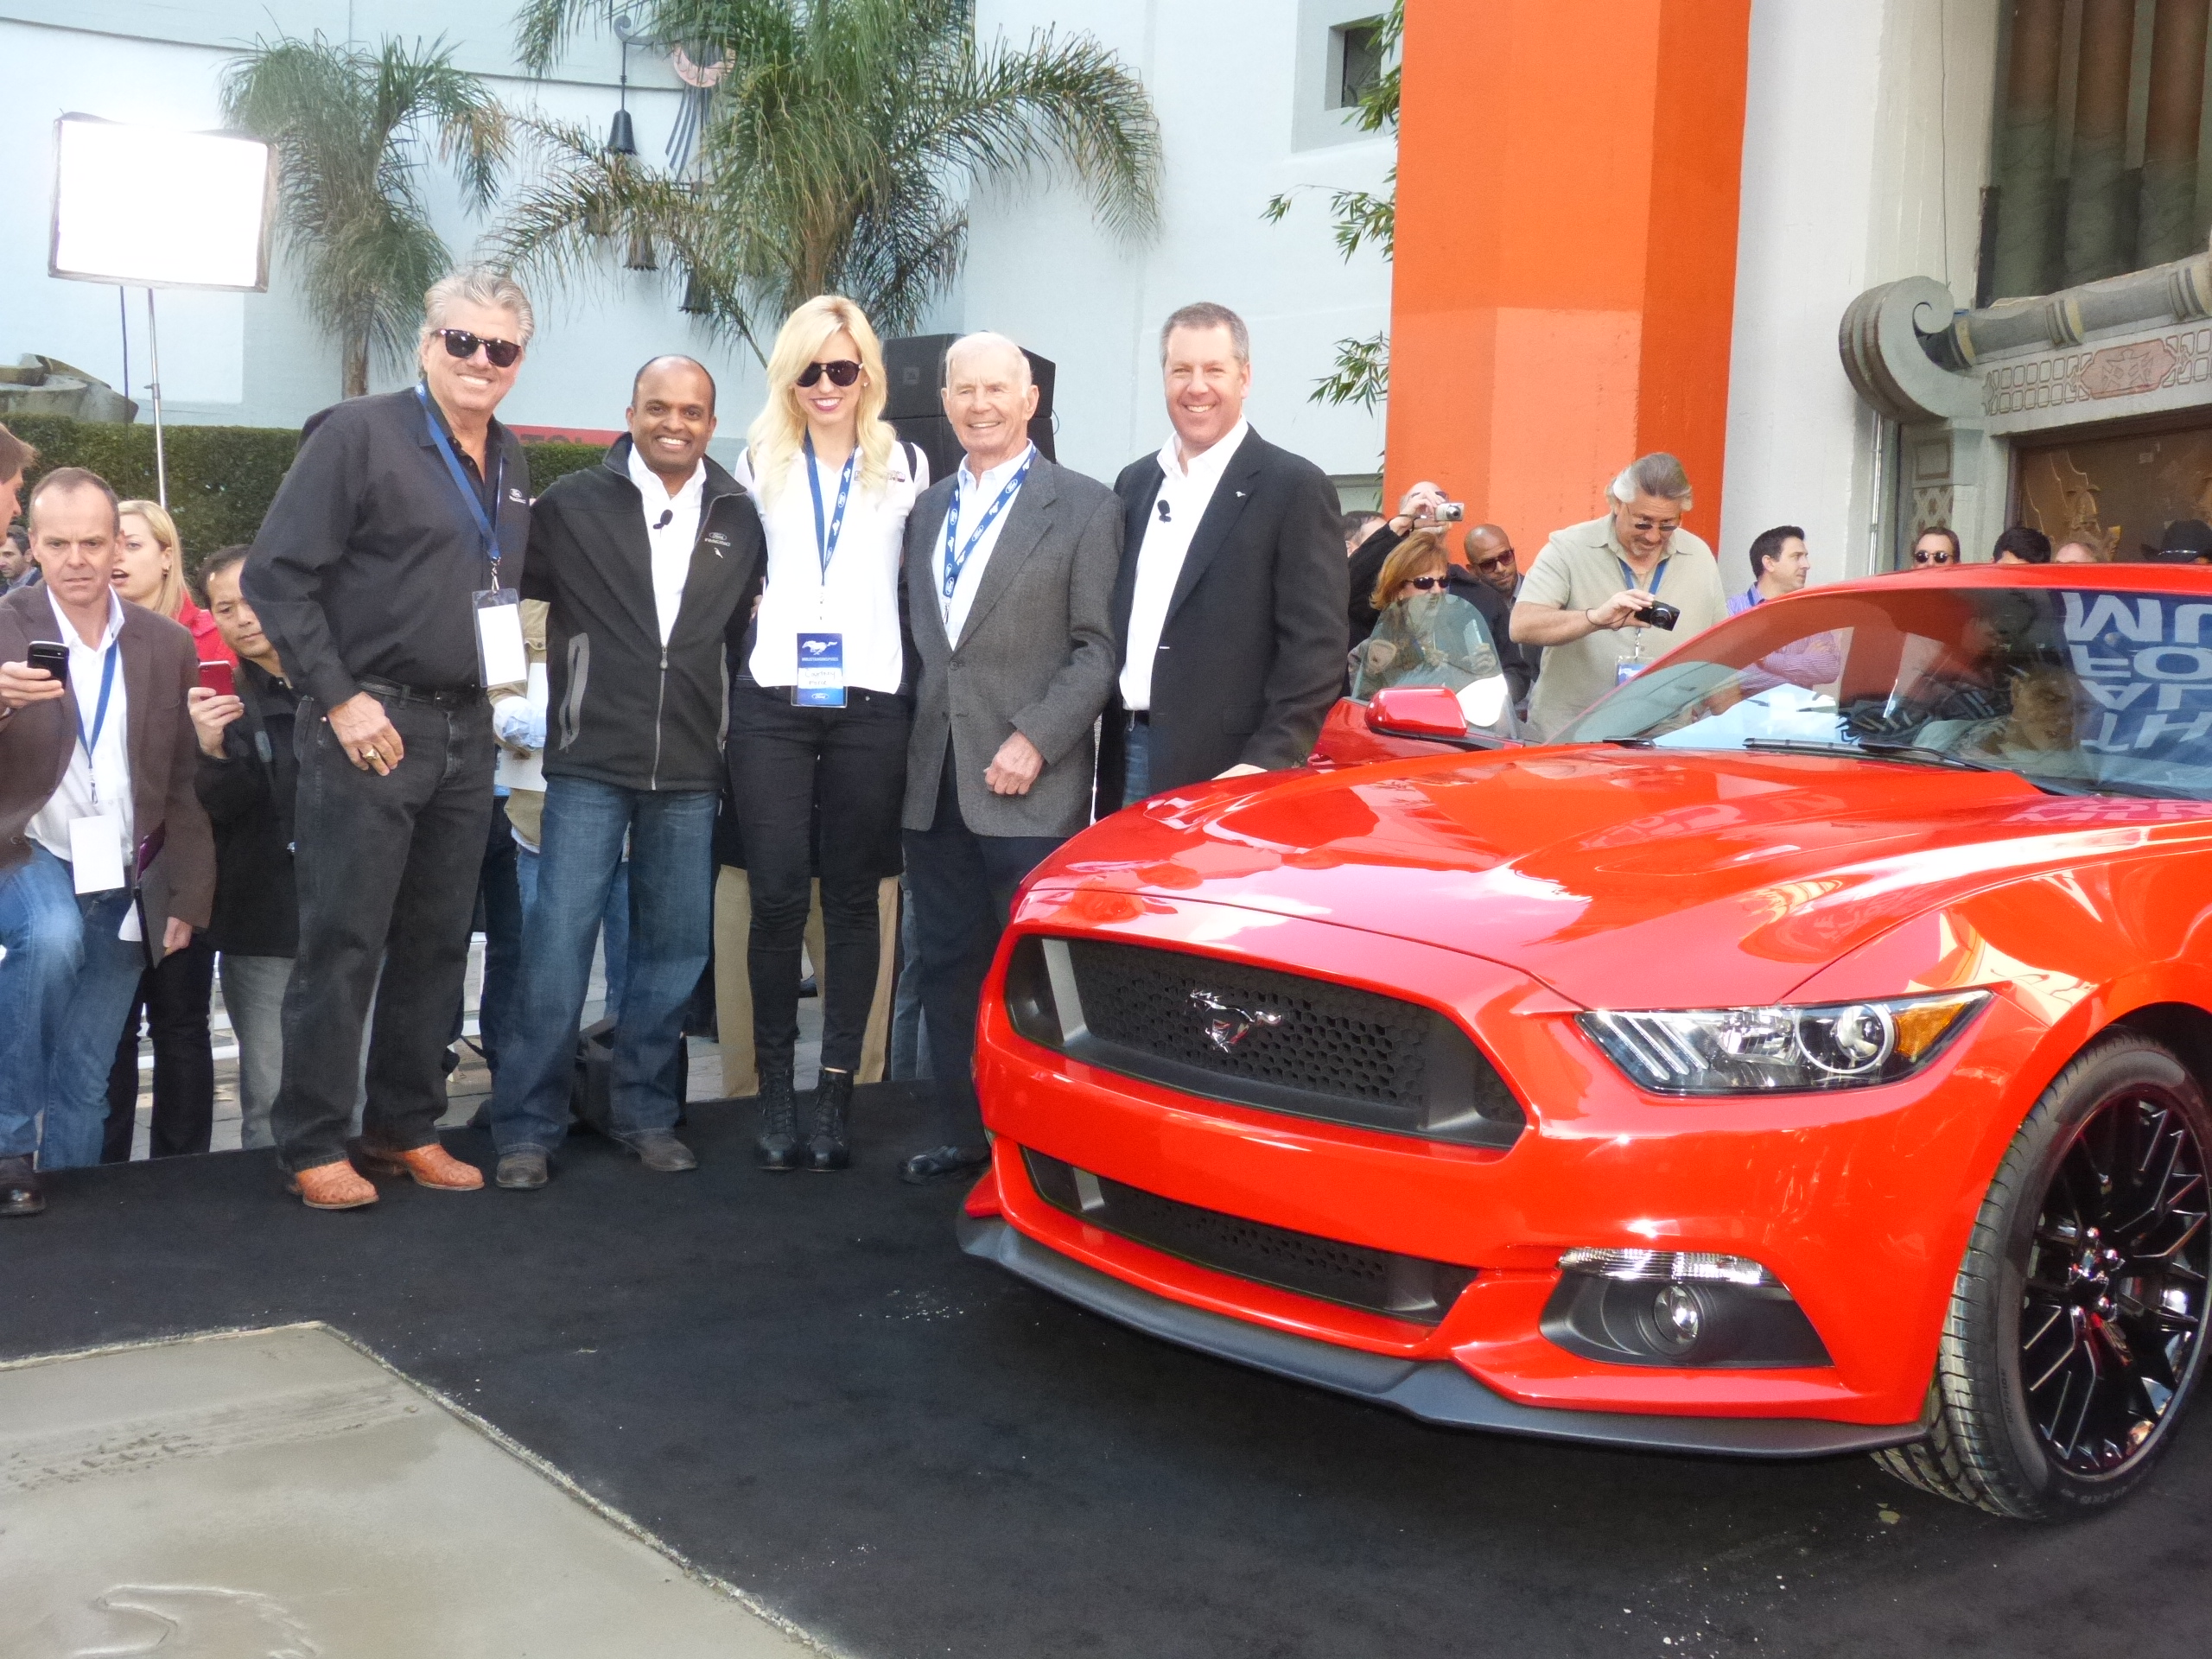 2015 Ford Mustang revealed in worldwide celebration